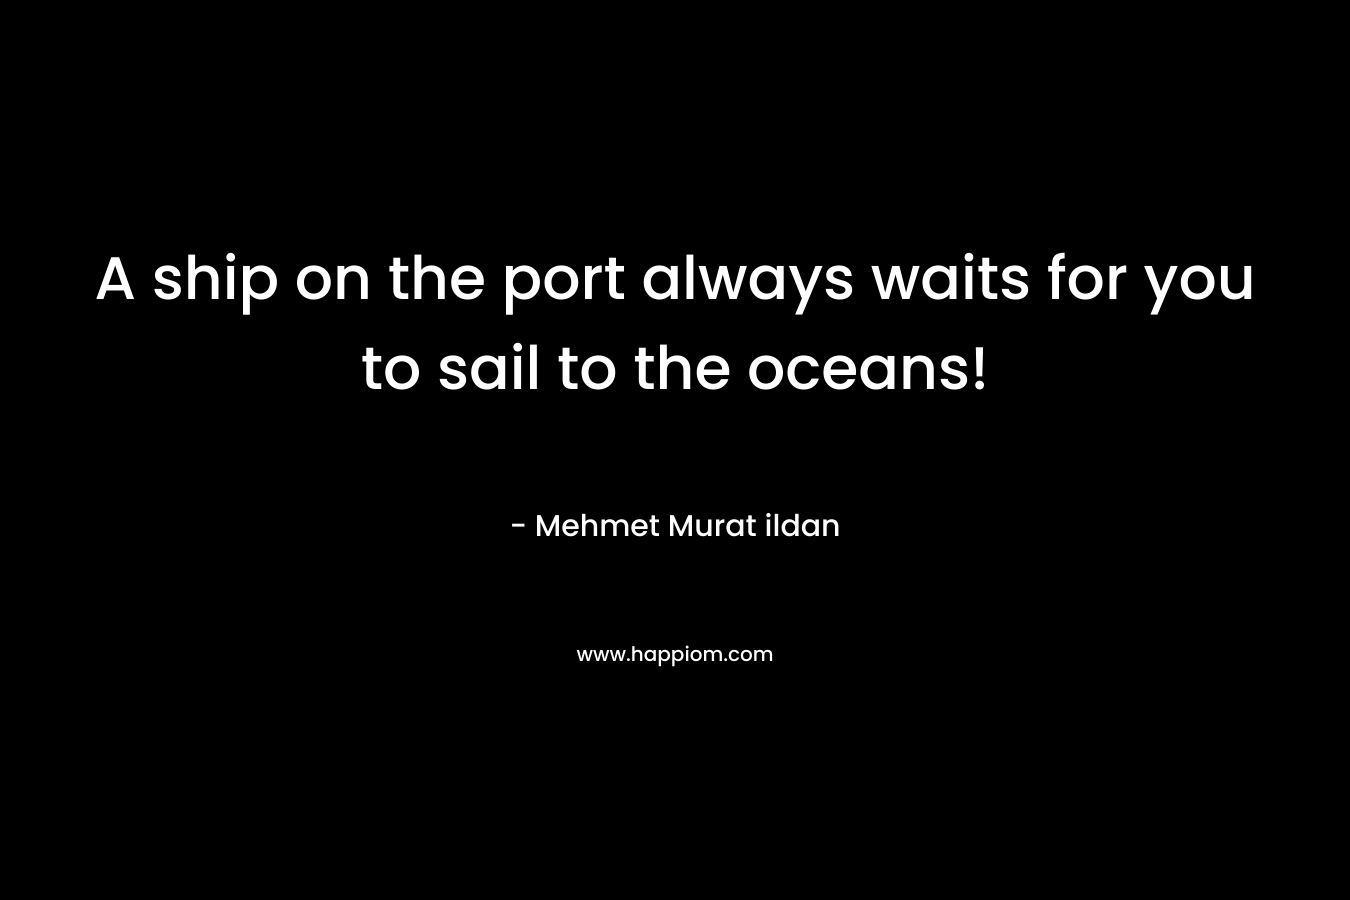 A ship on the port always waits for you to sail to the oceans! – Mehmet Murat ildan